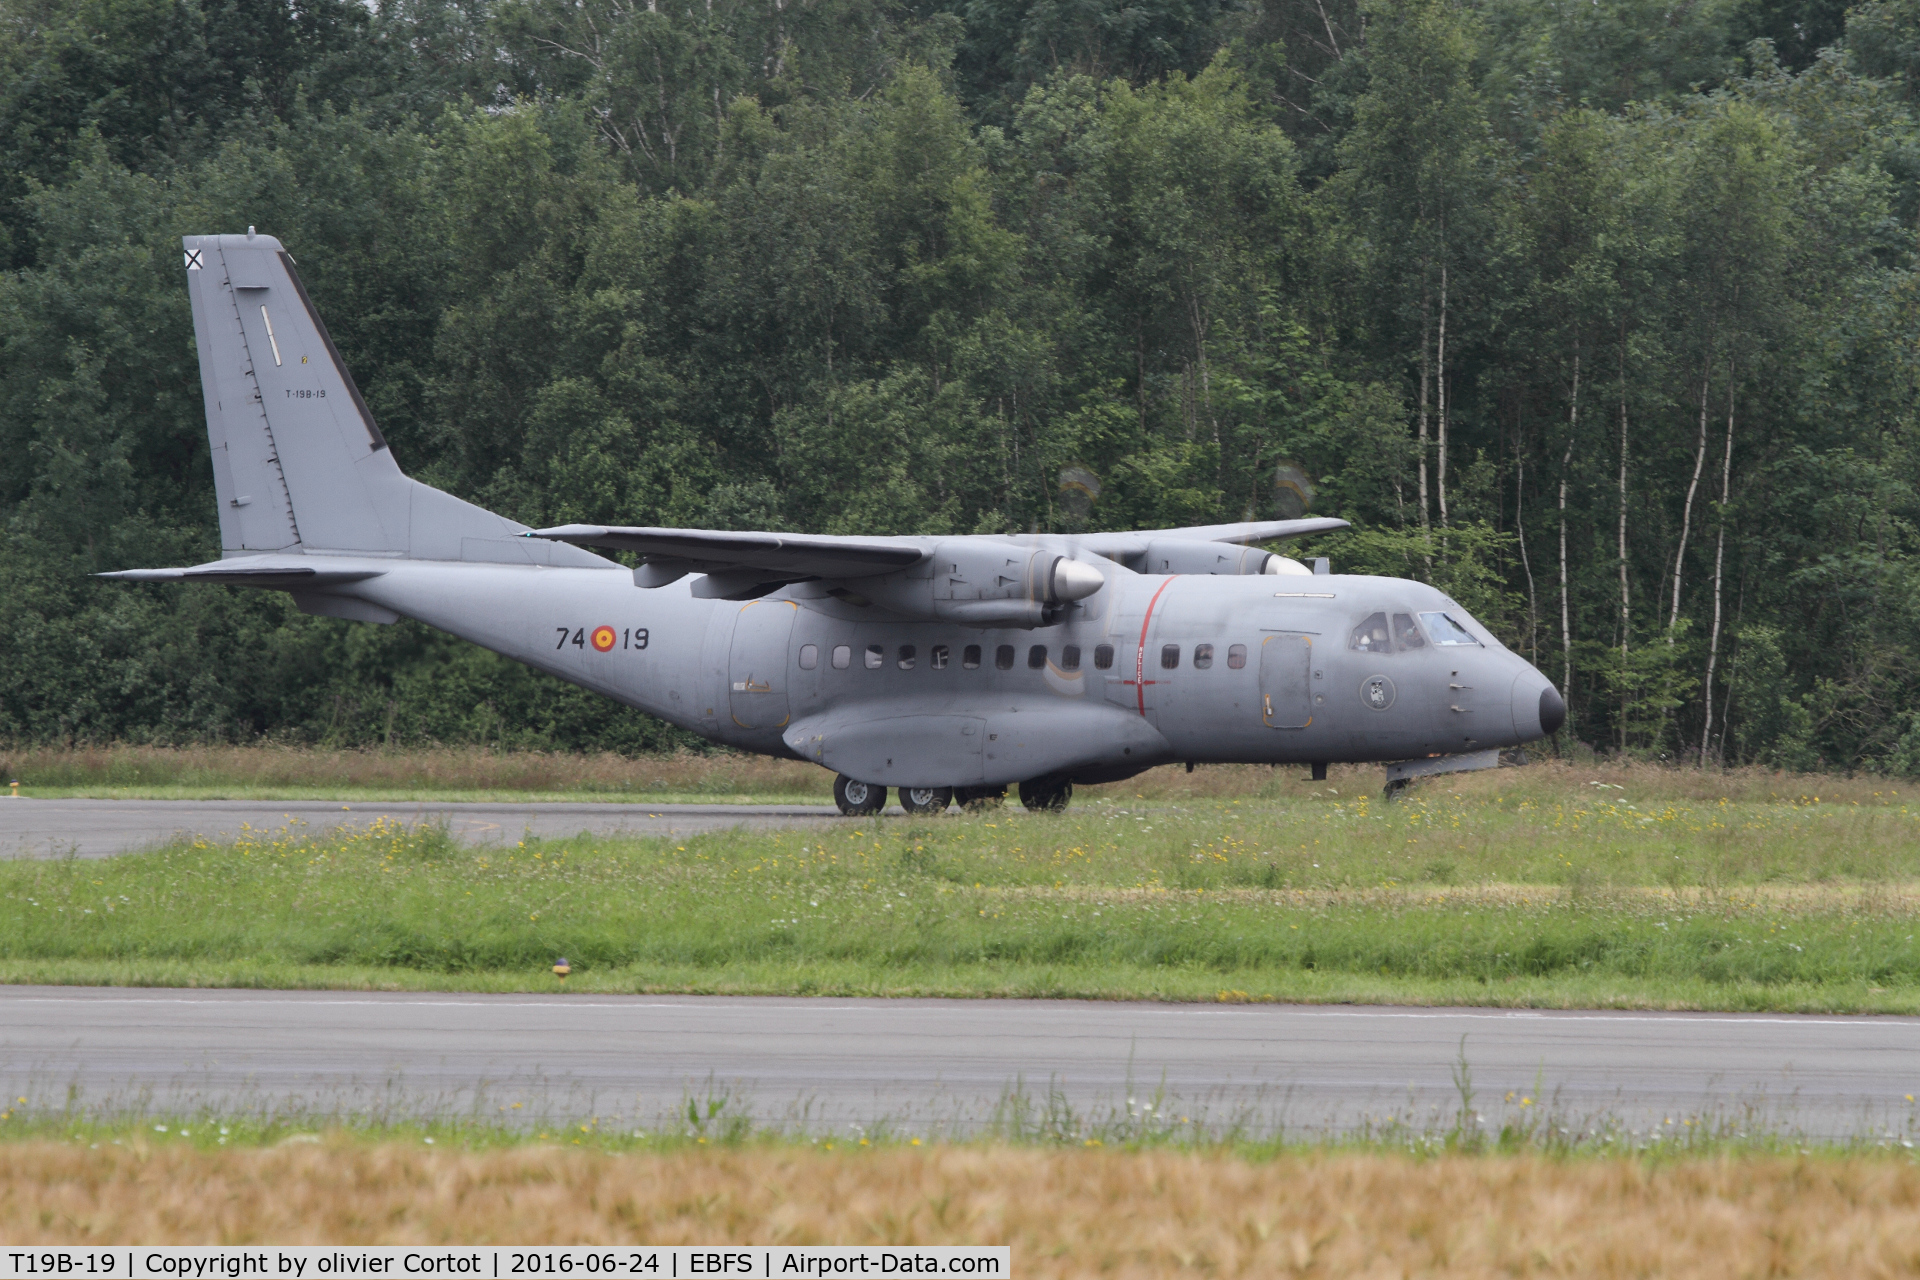 T19B-19, 1993 Airtech CN-235-100M C/N C076, Spanish solo display support aircraft